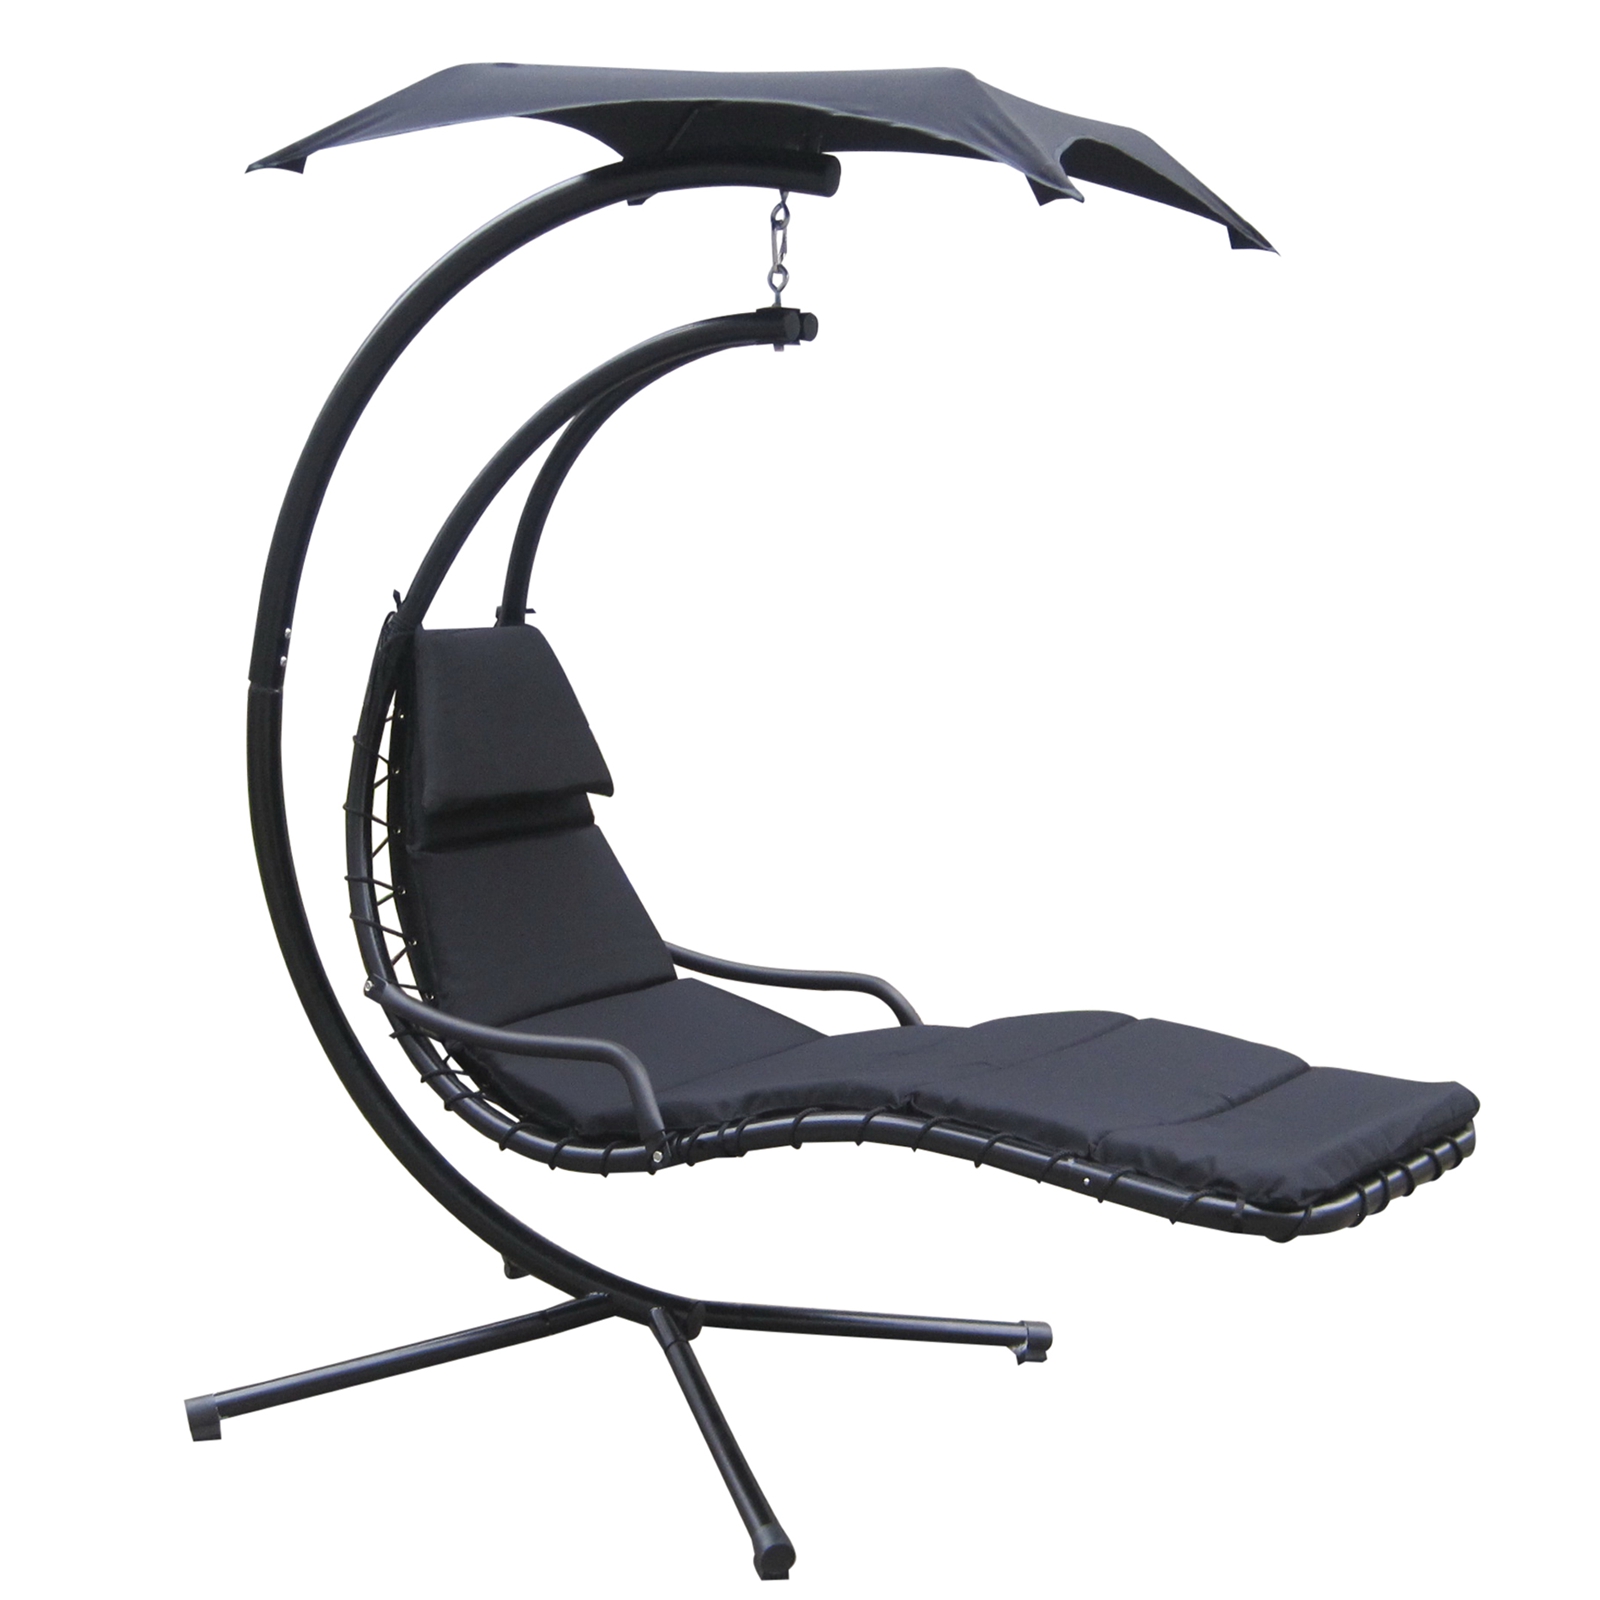 hanging chaise lounger chair